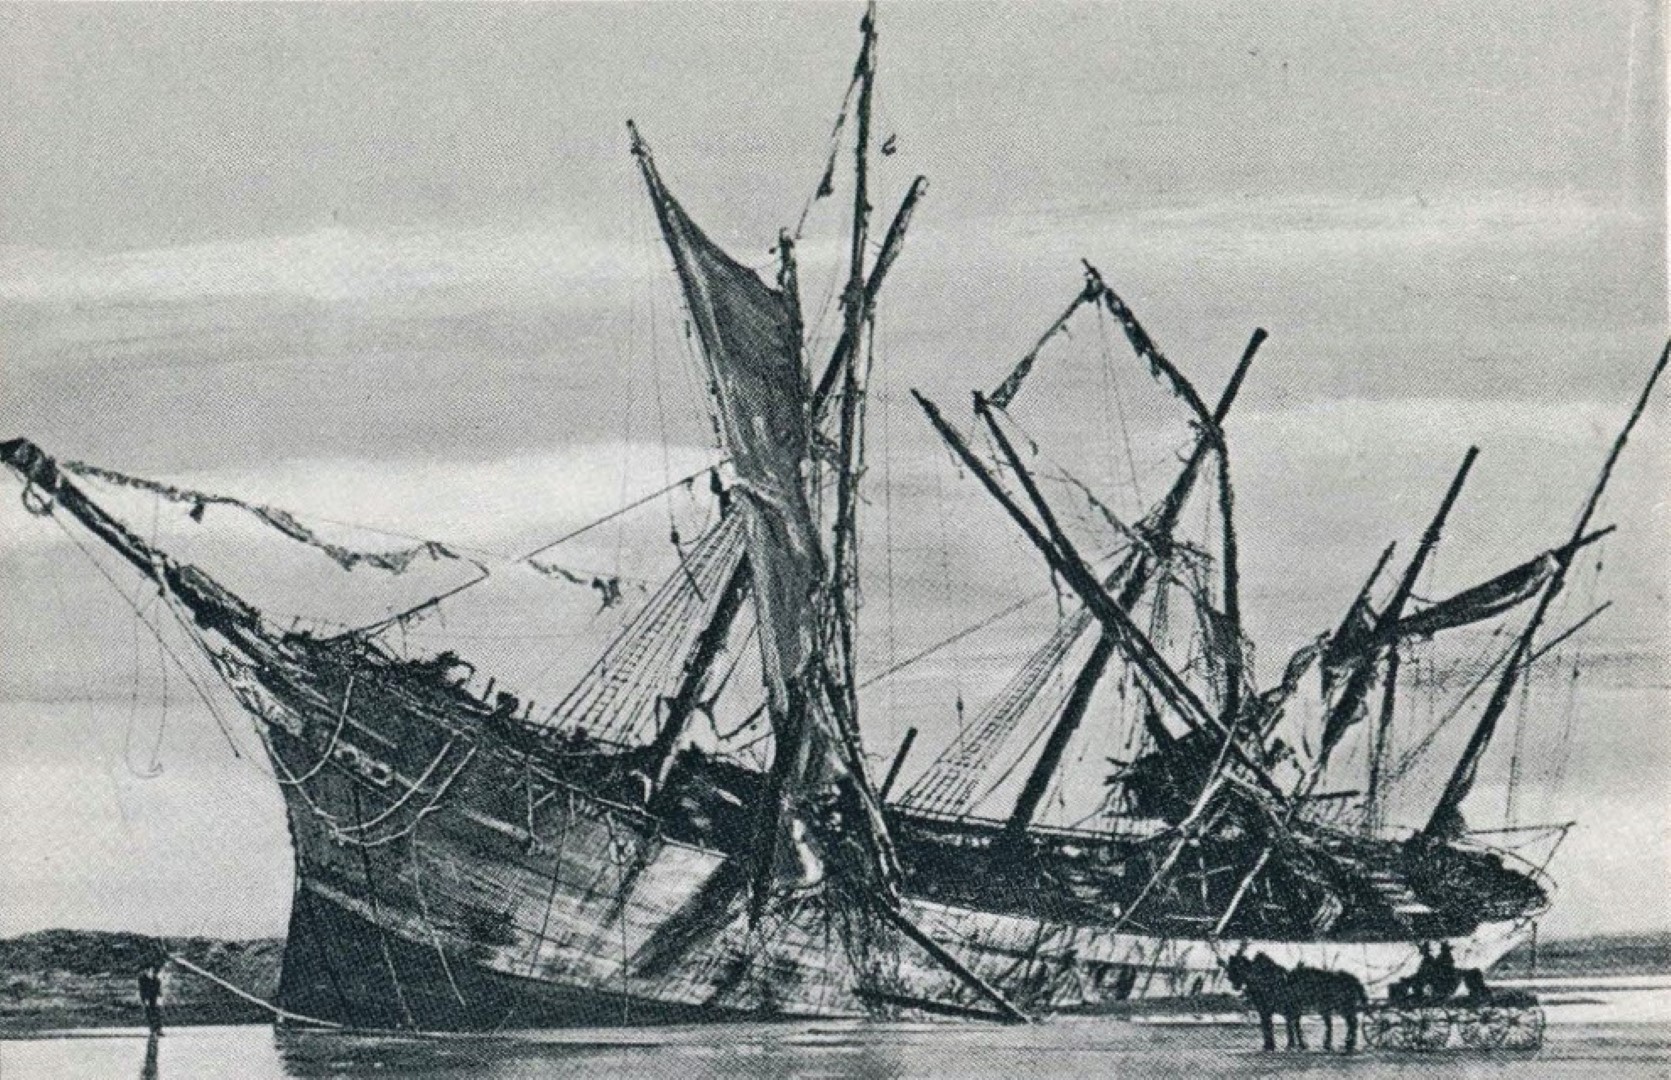 Peter Iredale wrecked on the Oregon Coast masts sails spars and rigging ruined 1906